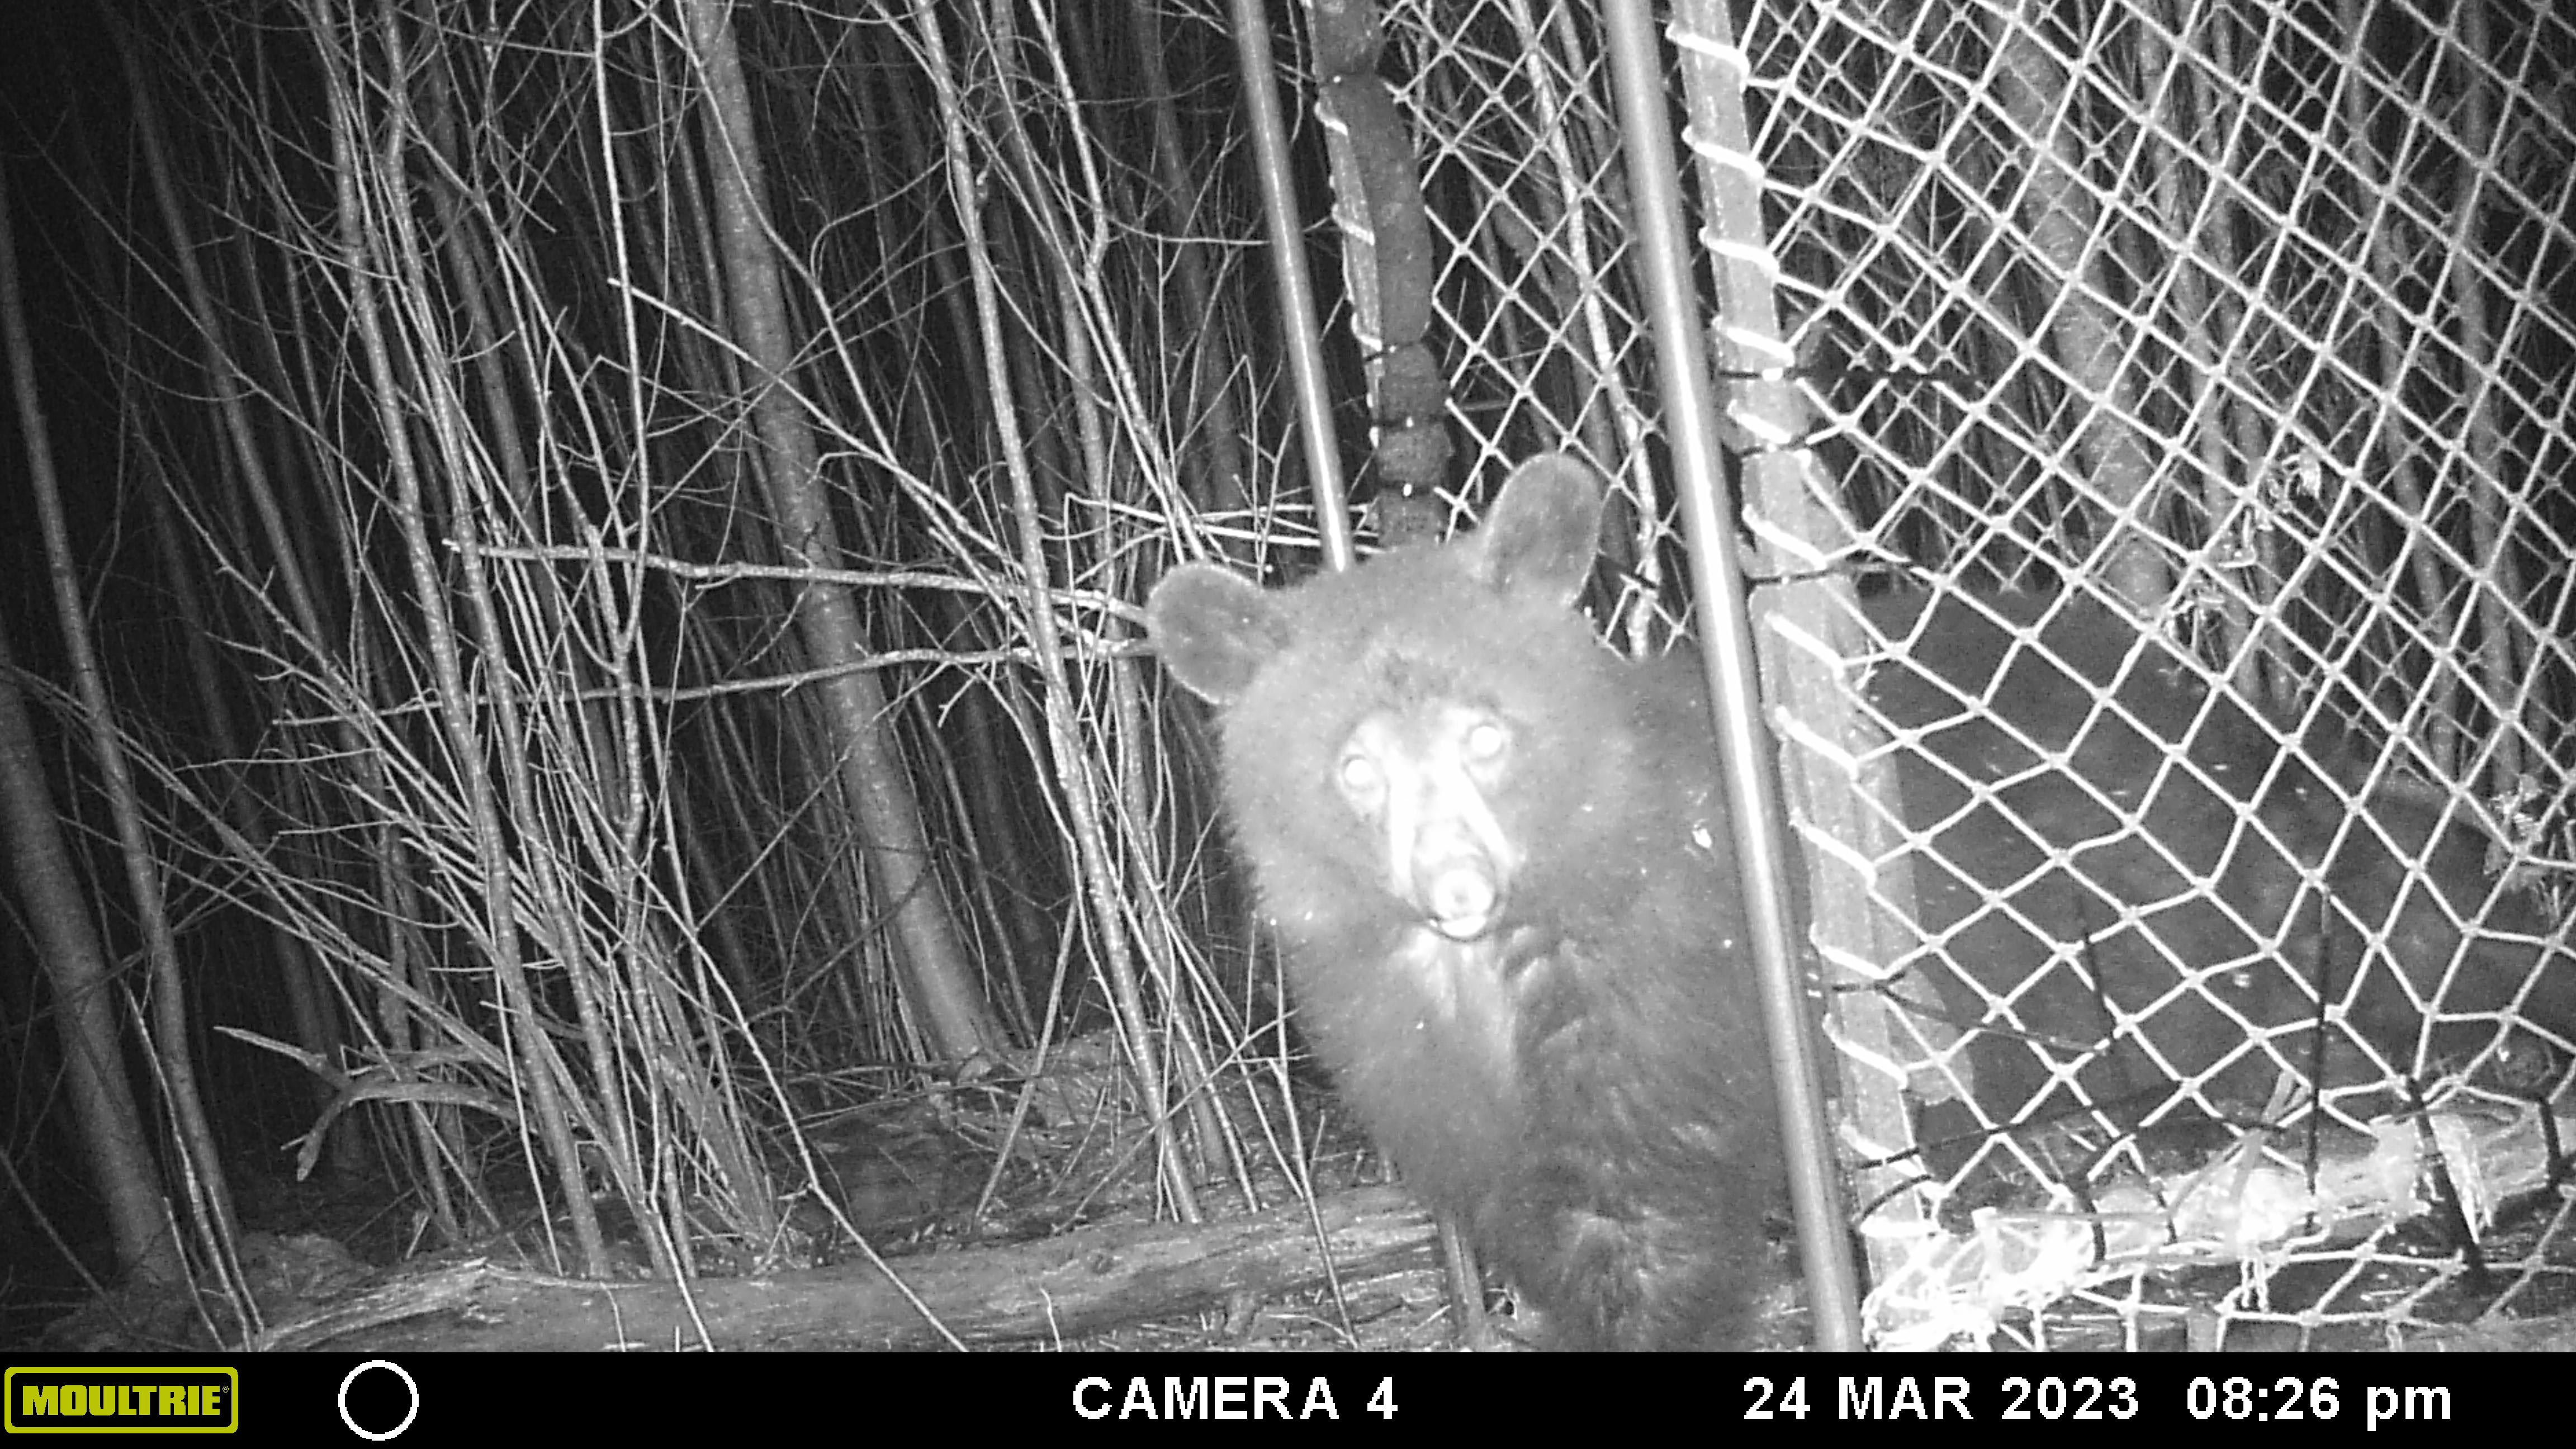 Bear looking trail cam from the entrance of a Clover trap